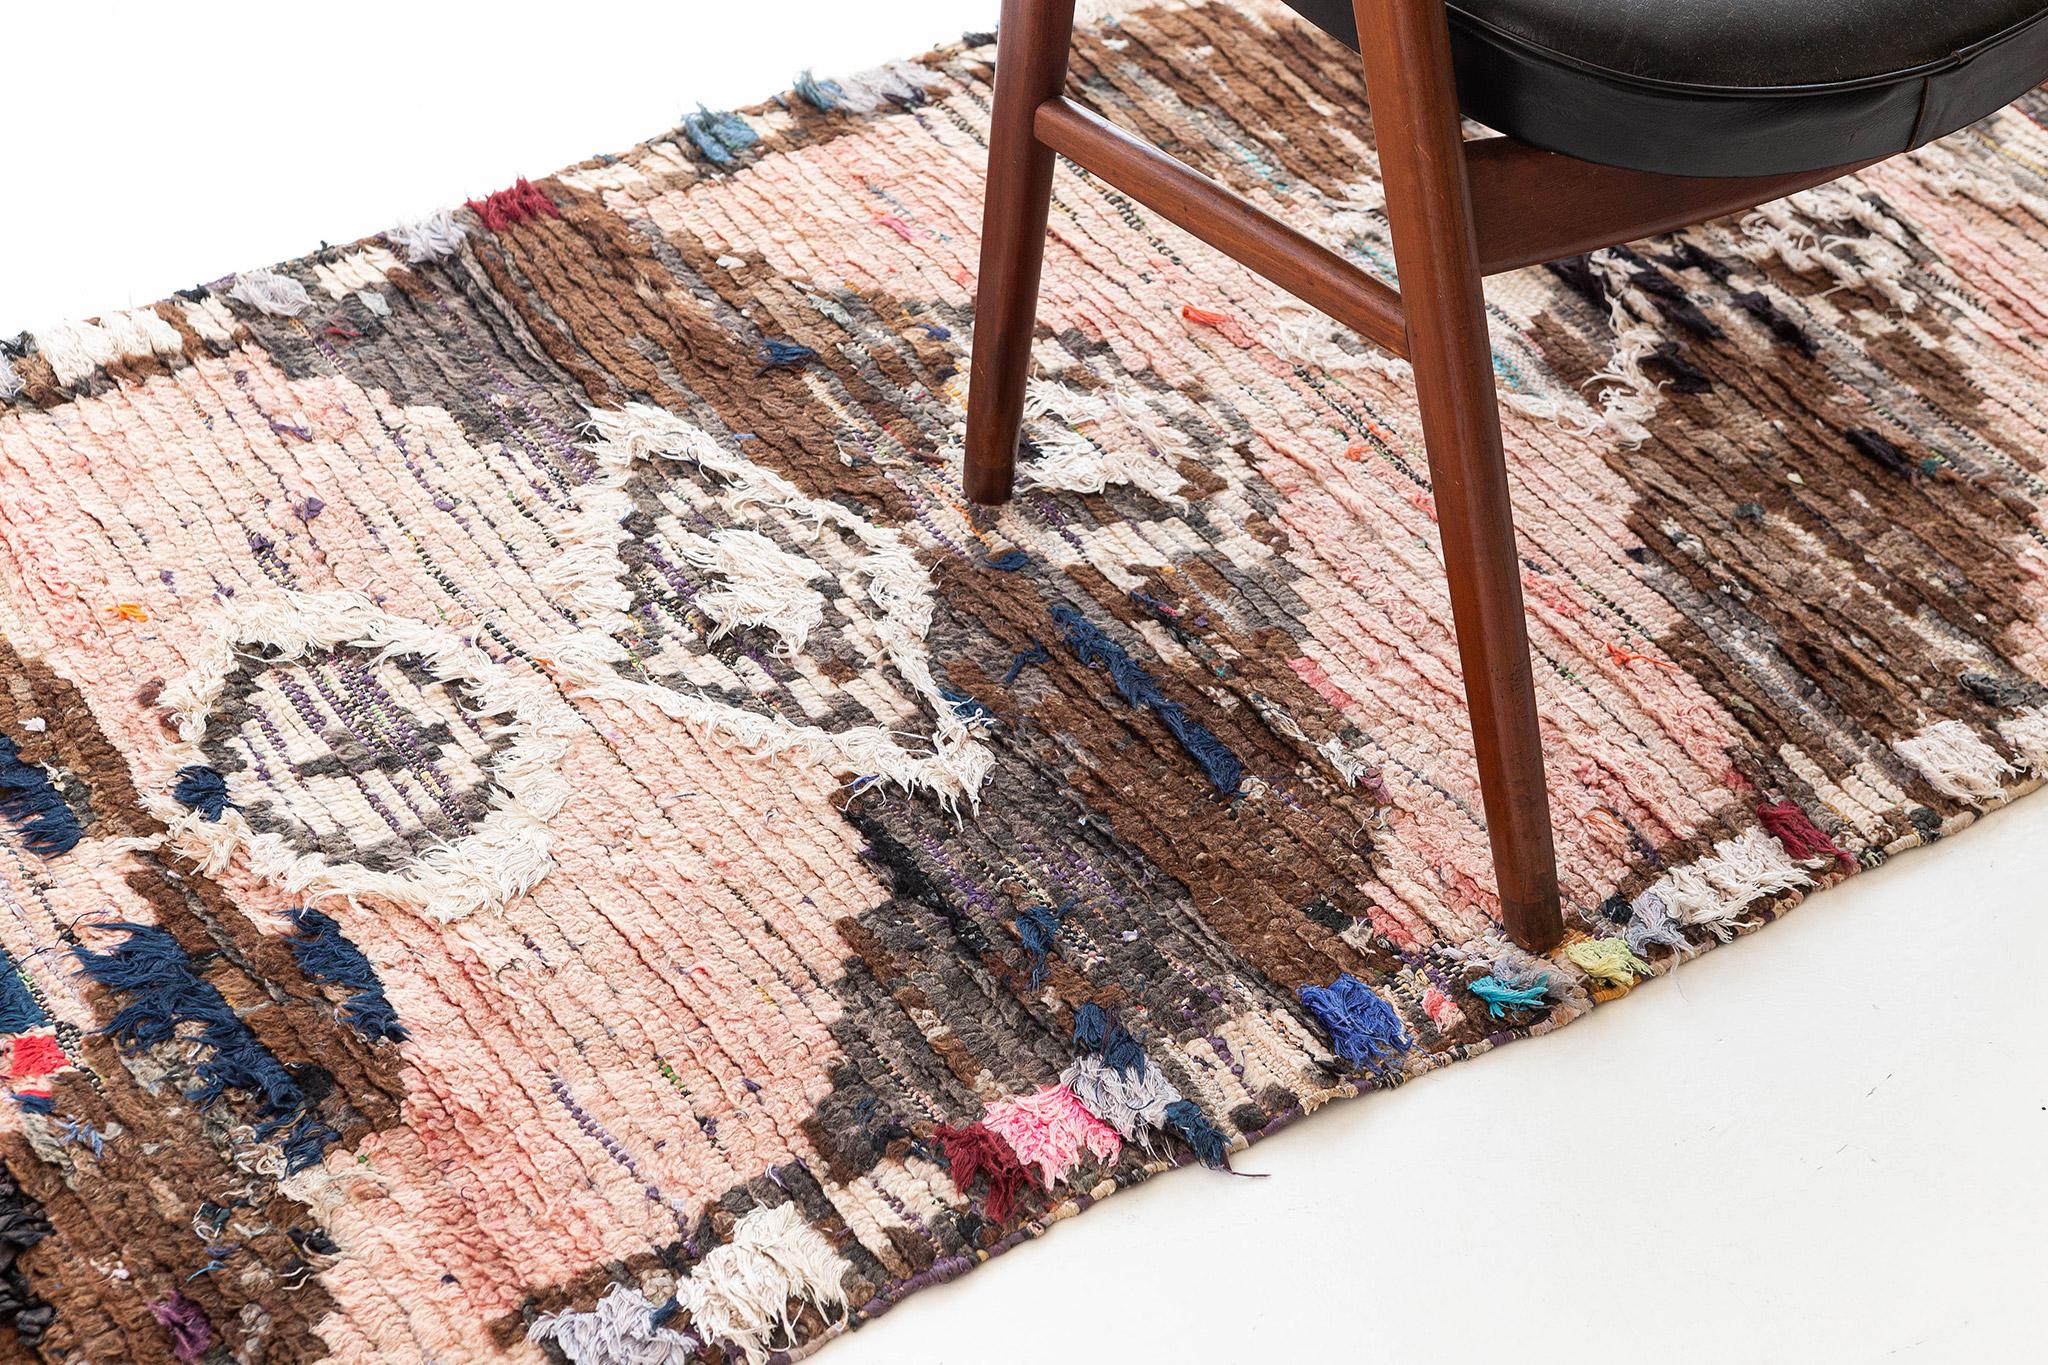 Alternating chevron stripes of rosy pinks and mottled brown run the width of the field. A column of irregular diamonds with nested contours in matching coloration runs through the center of the rug. Borders composed of stacked rectangles frame the